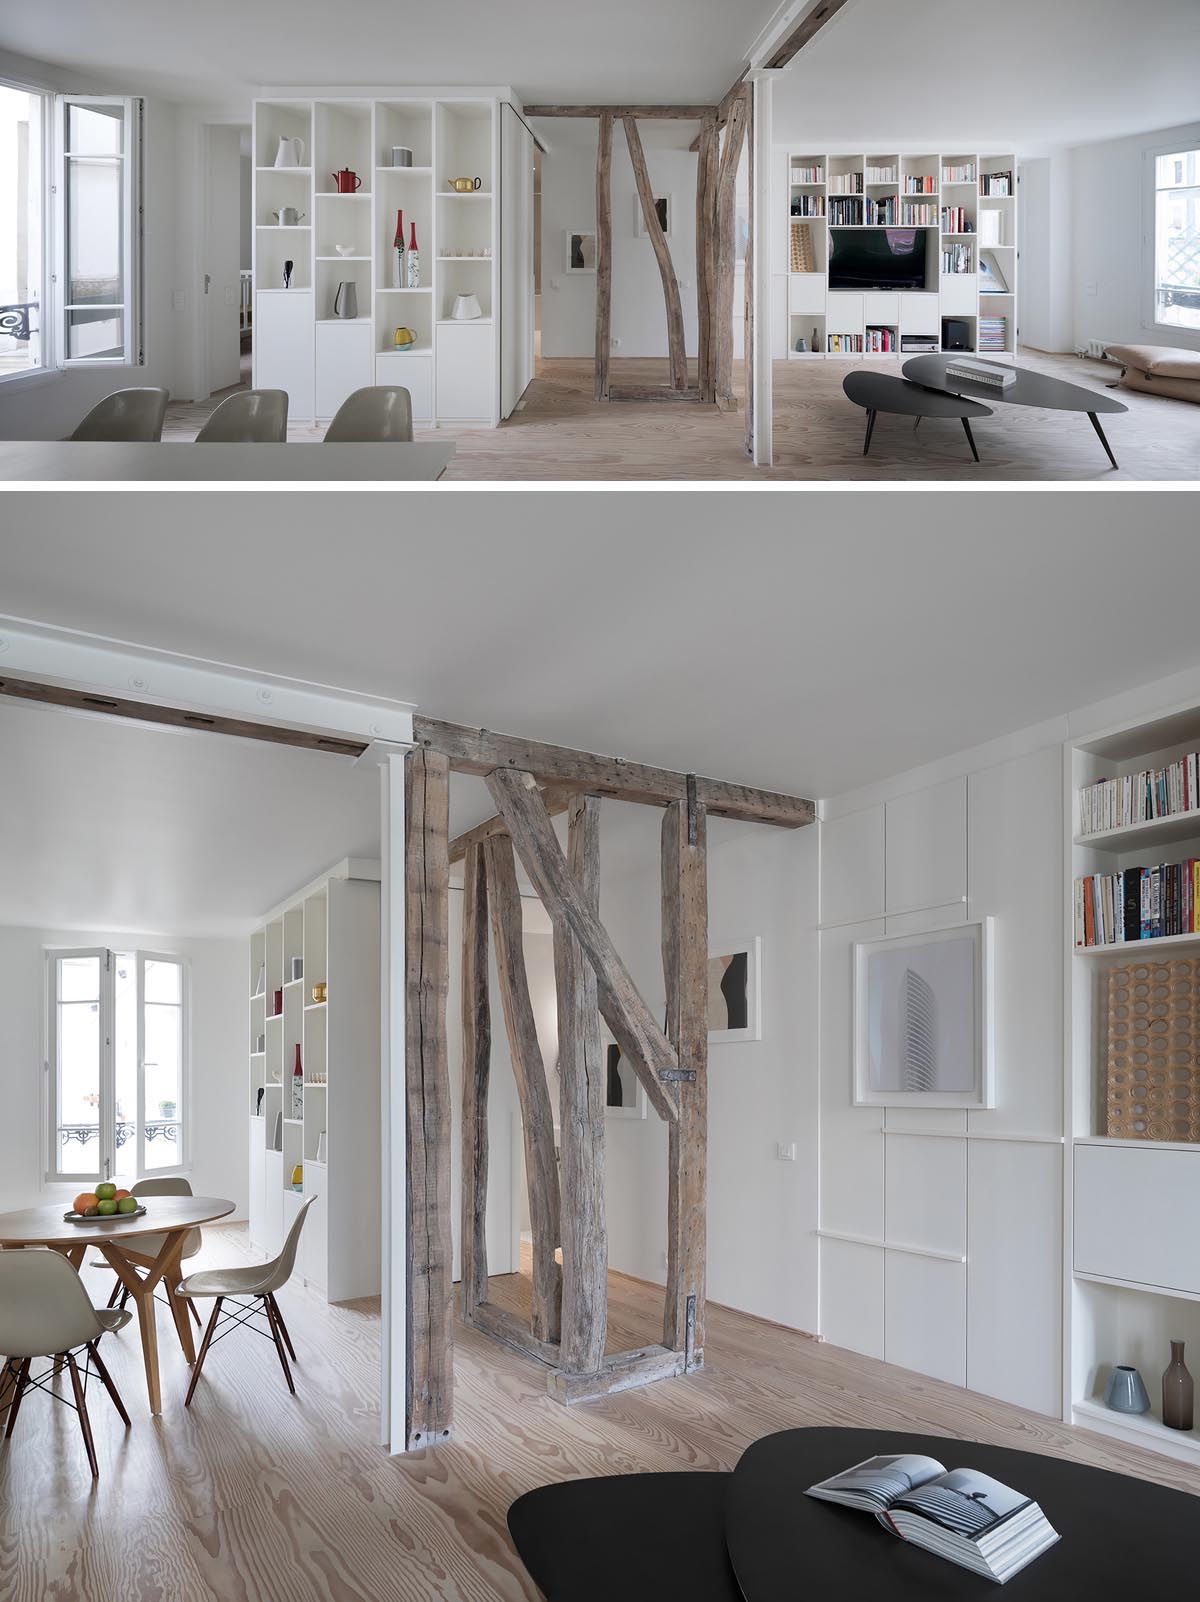 A modern open plan apartment with exposed wooden structure, built-in shelving, and a white color theme.